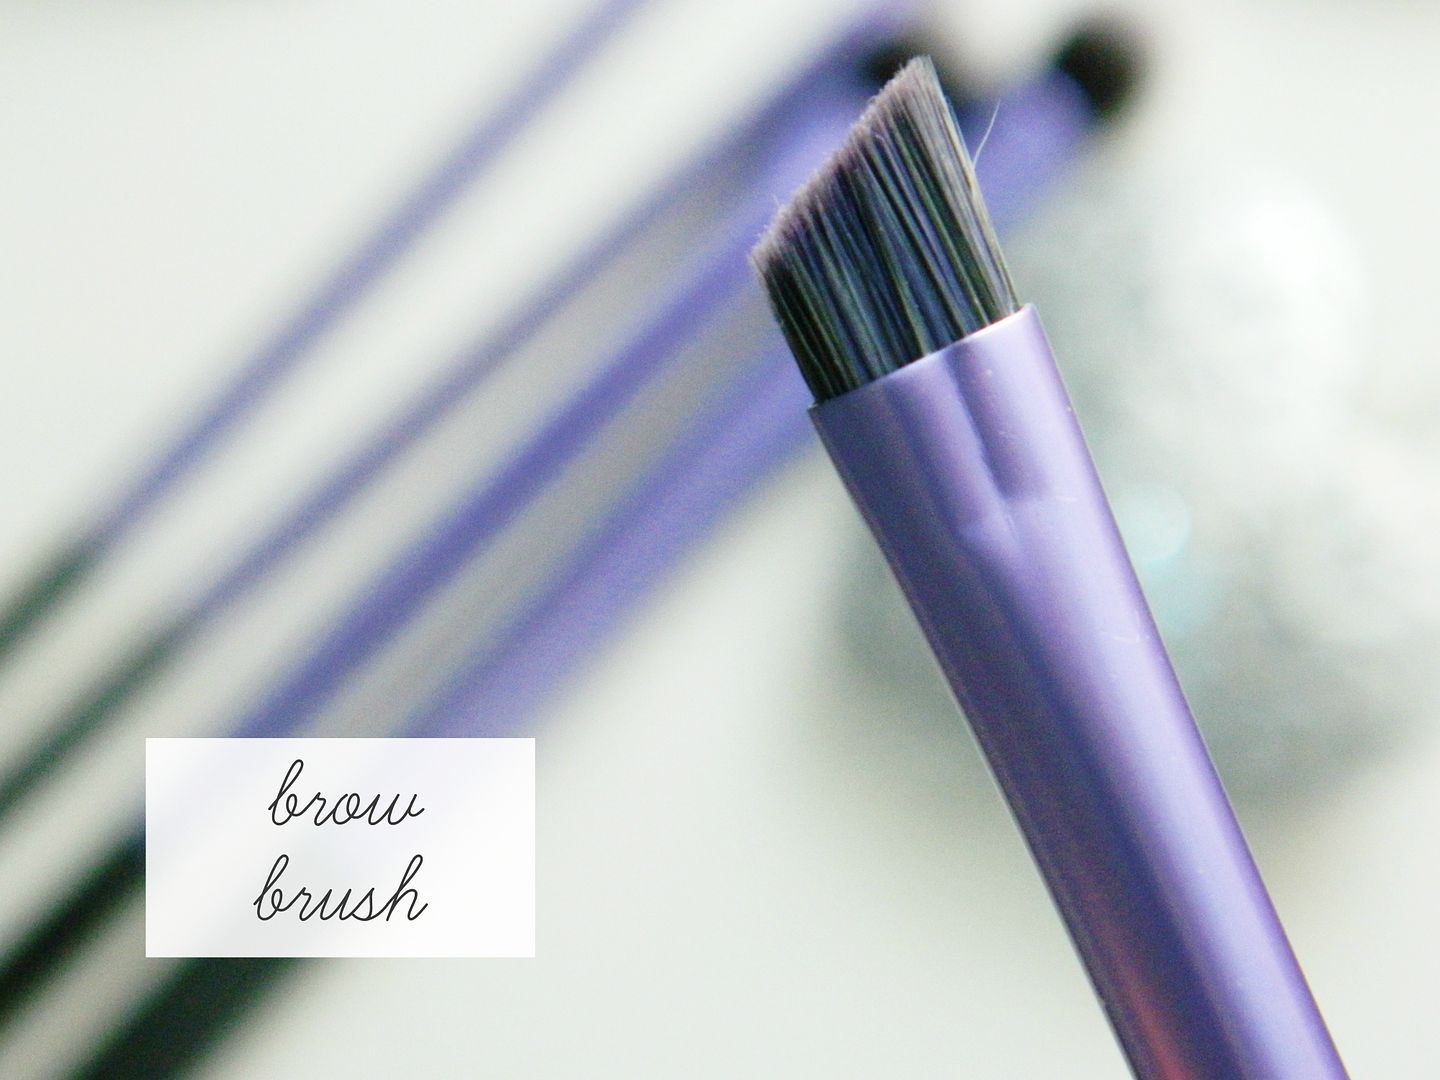 Real Techniques Starter Set Eye Makeup Brushes Brow Brush Review Belle-amie UK Beauty Fashion Lifestyle Blog